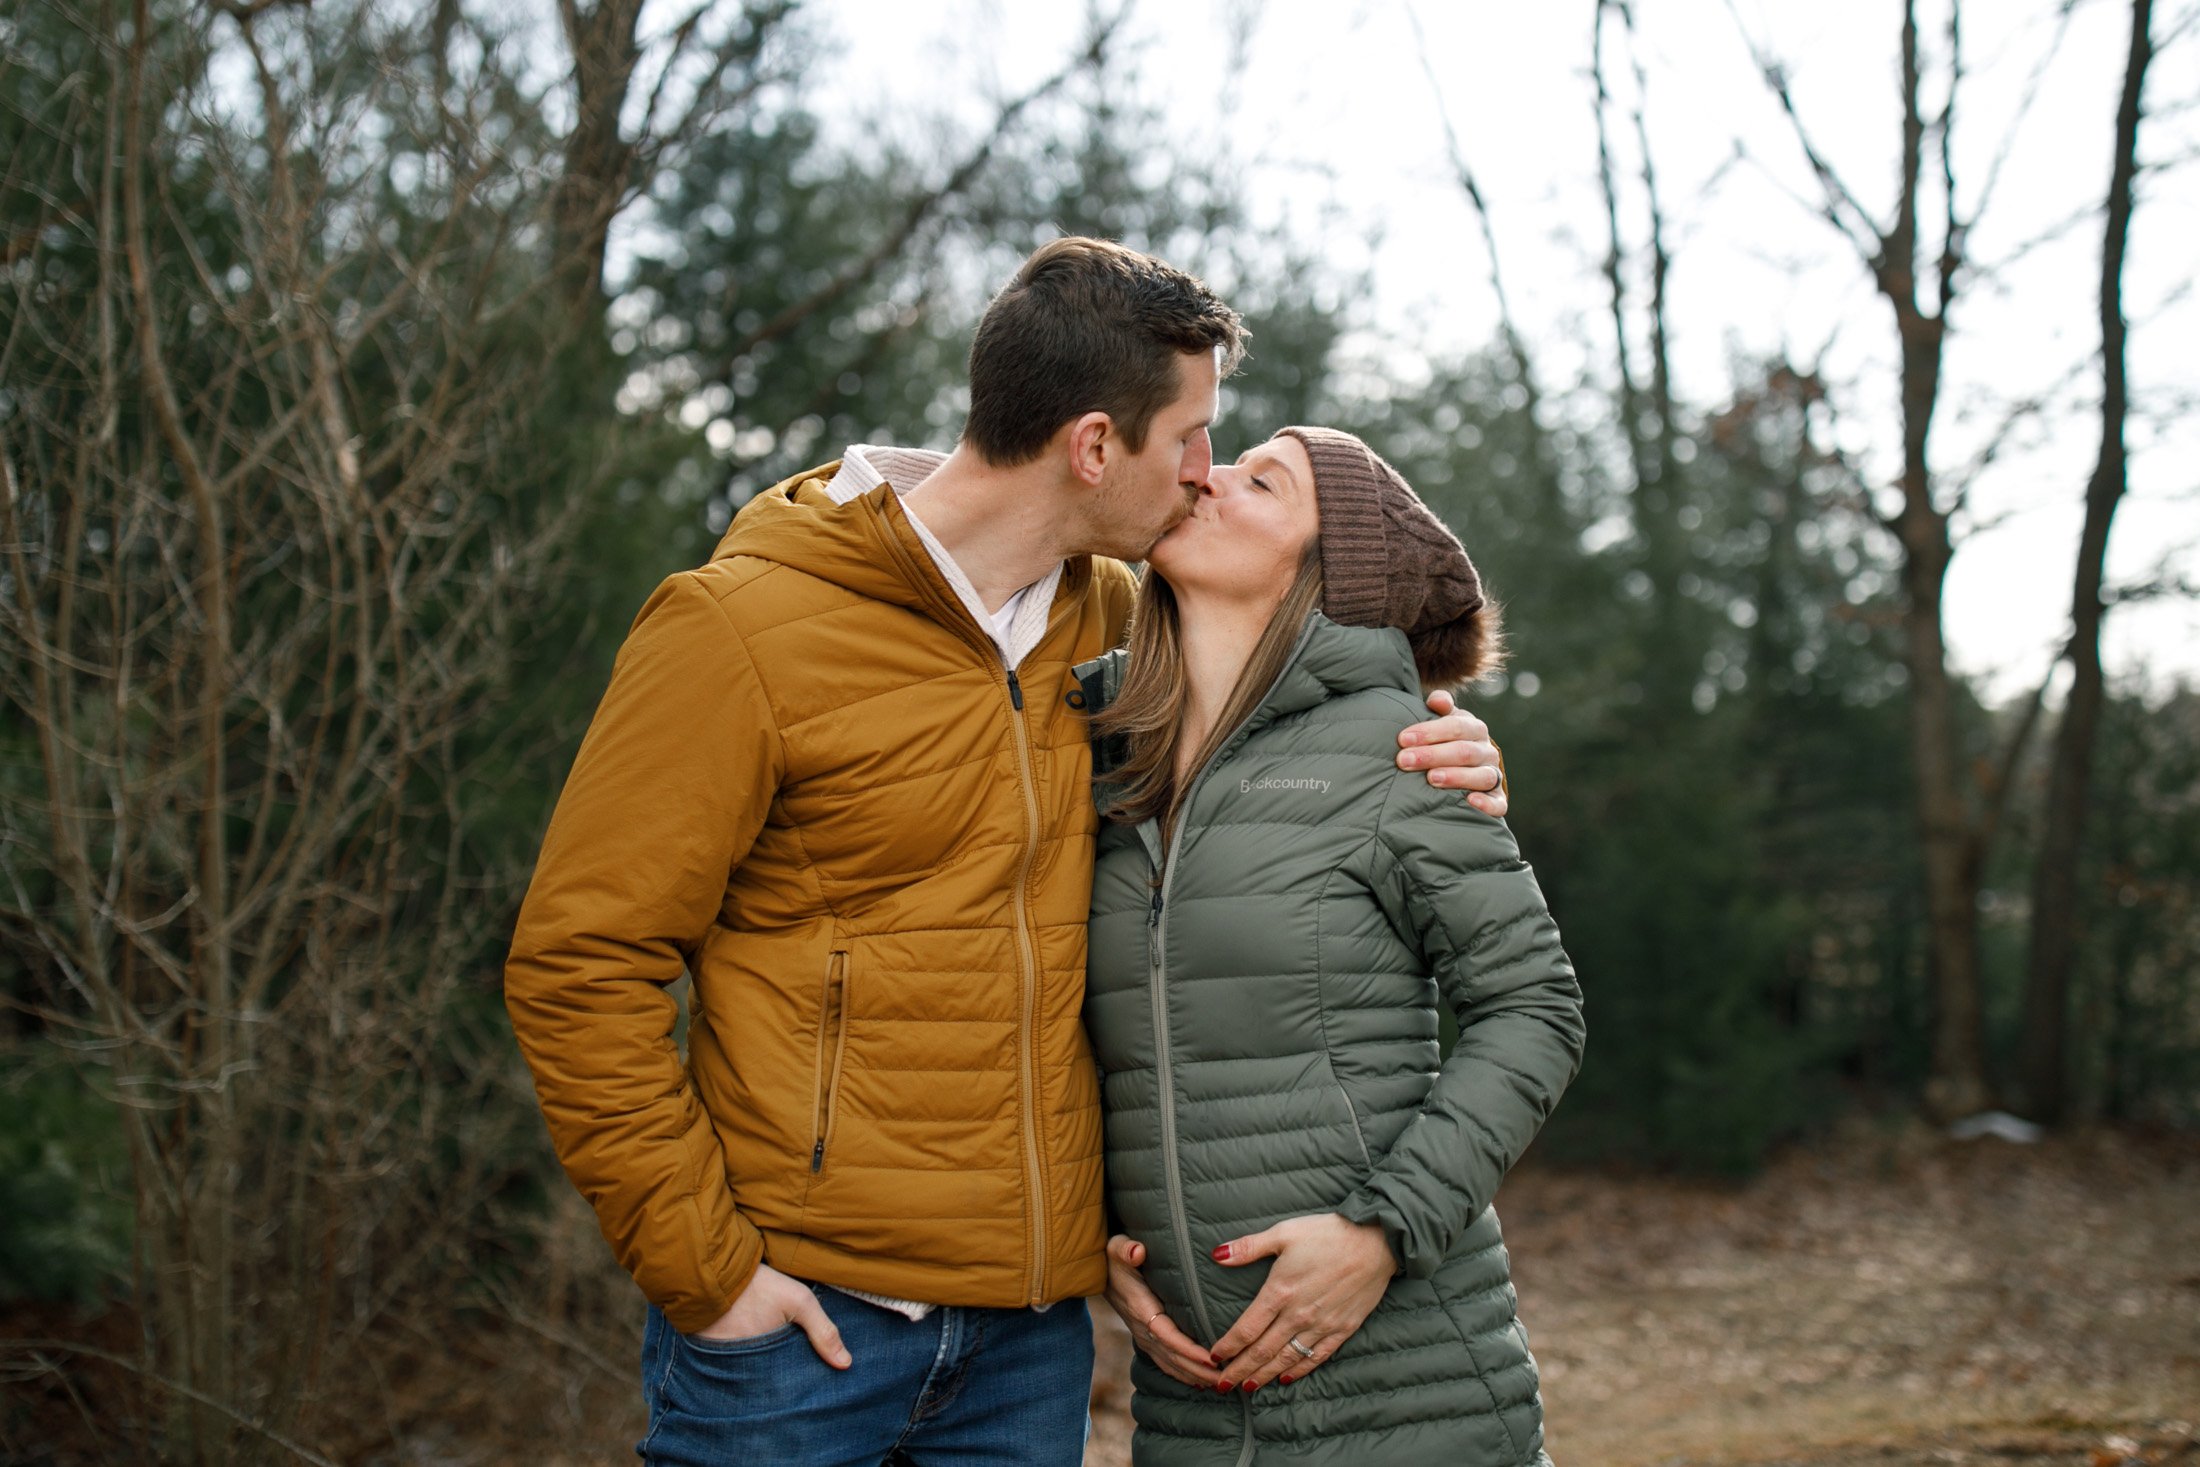 George and Kelsey Pregnancy Announcement - Grand Haven Family Photographer - Black Diamond Equestrian - Nunica Family Photogrpaher - Maternity Session - Pregnancy Announcement - Spring Lake Family Photographer - J Darling Photo_031.jpg